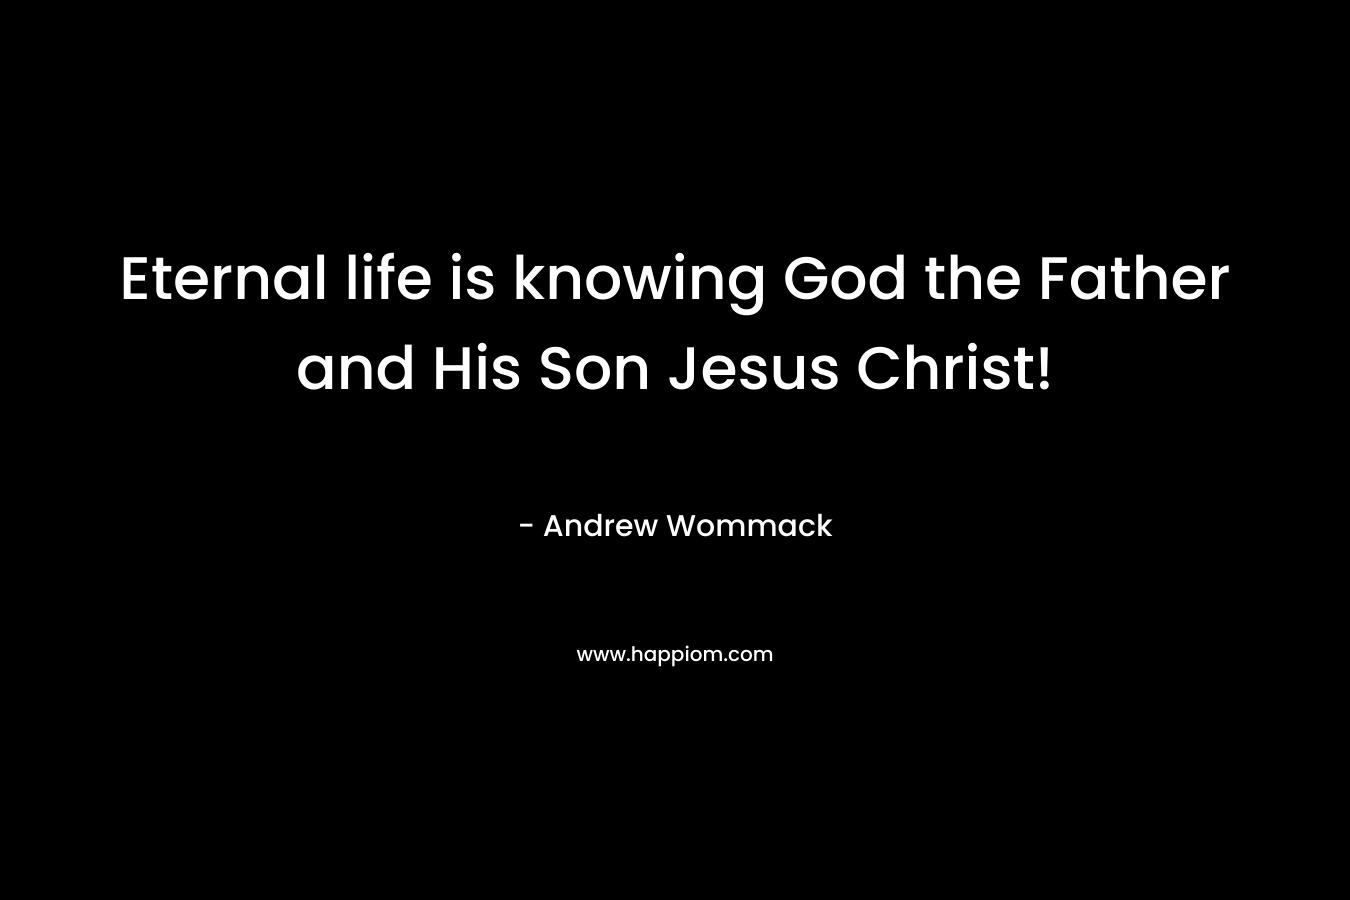 Eternal life is knowing God the Father and His Son Jesus Christ!